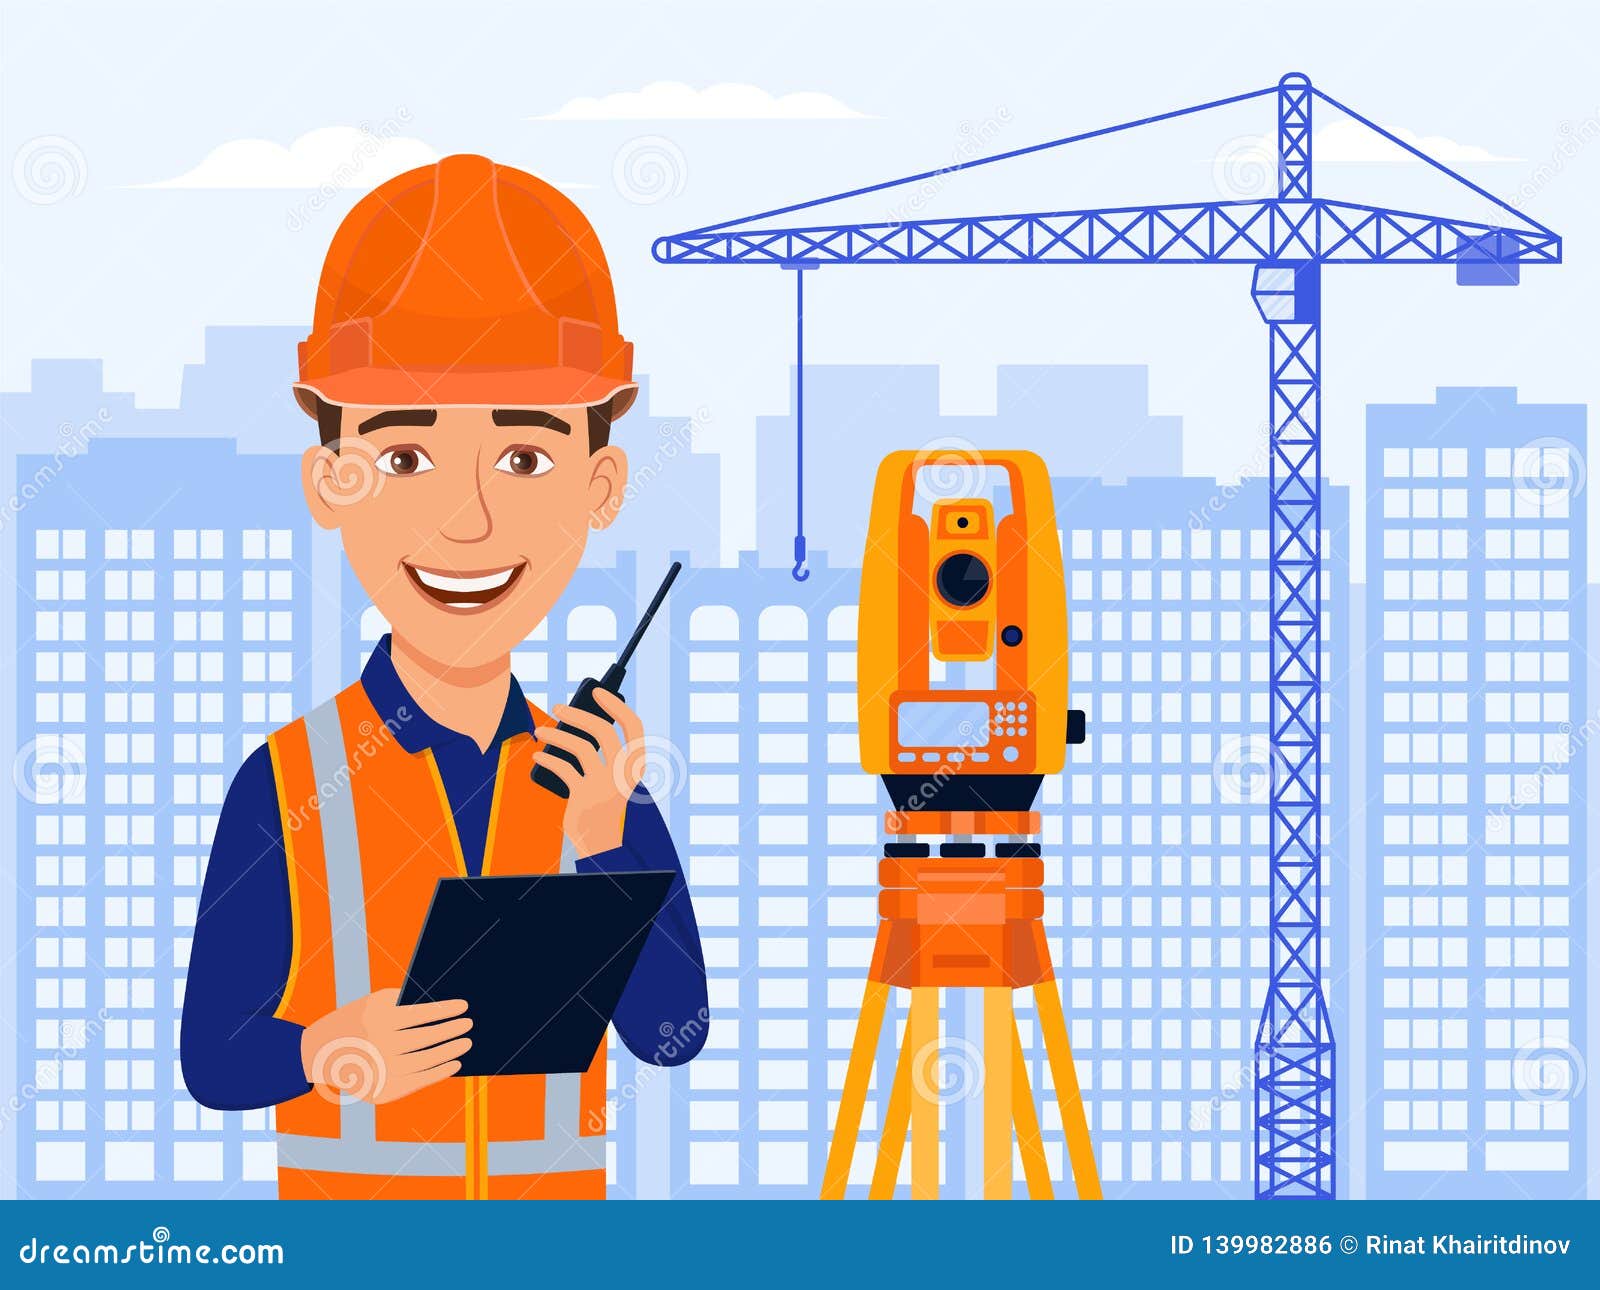 surveyor, cartographer, cartoon smile character with total station and measurements equipment. city view, construction crane..